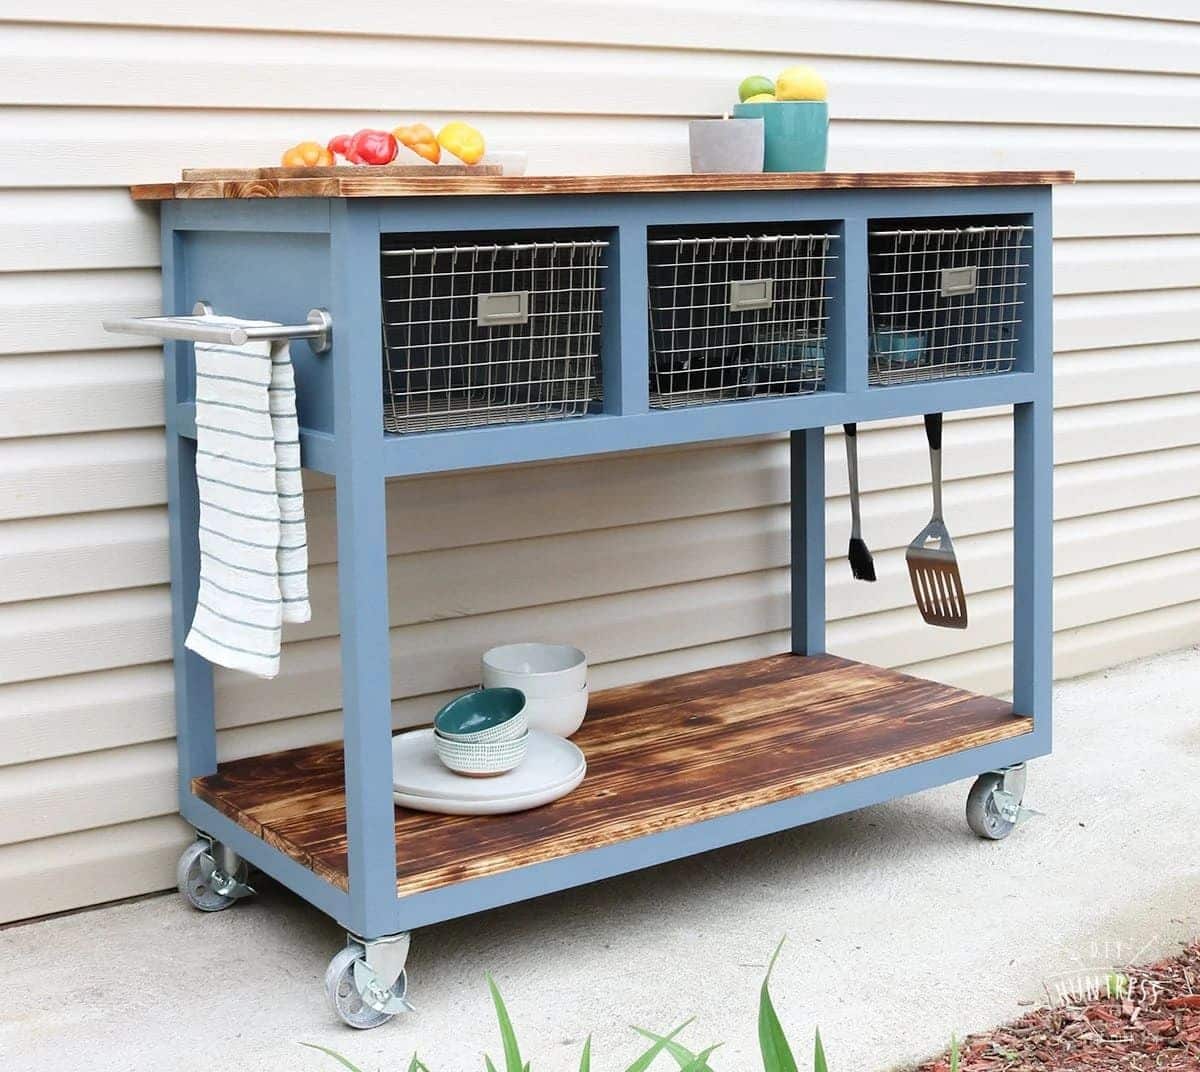 DIY Mobile Island/Grill Cart Station